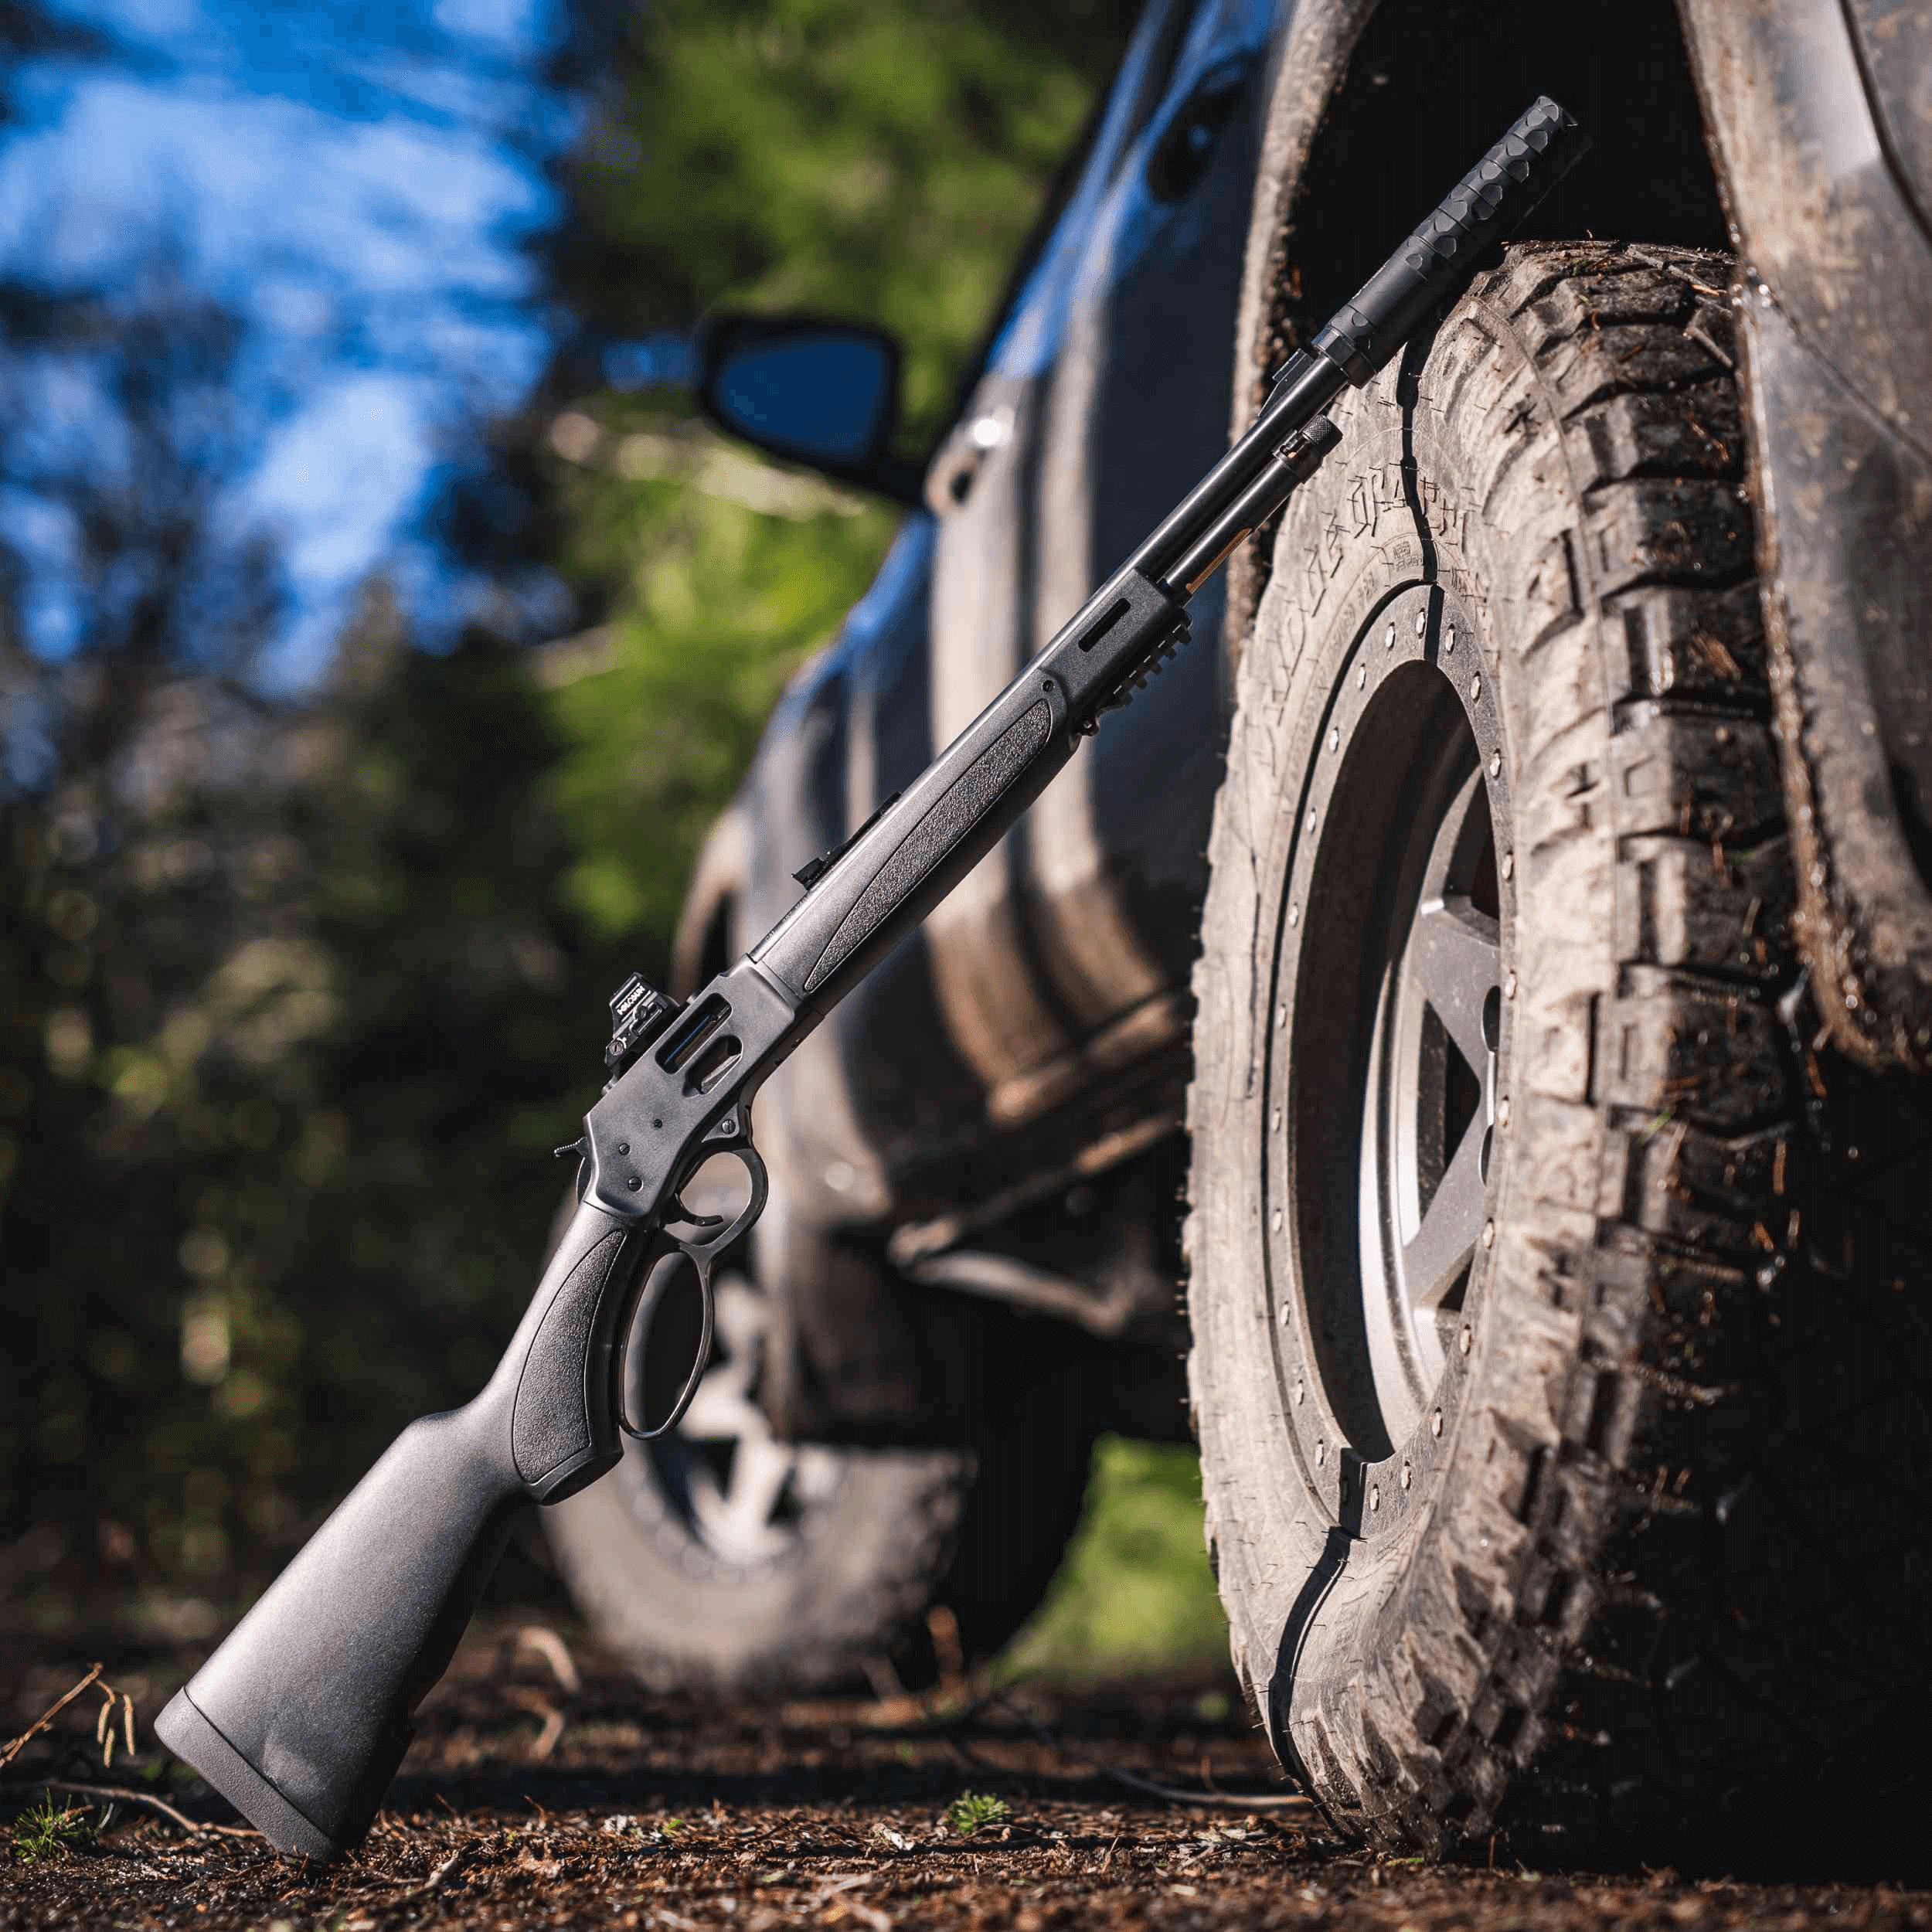 lever action rifle leaning against truck tire